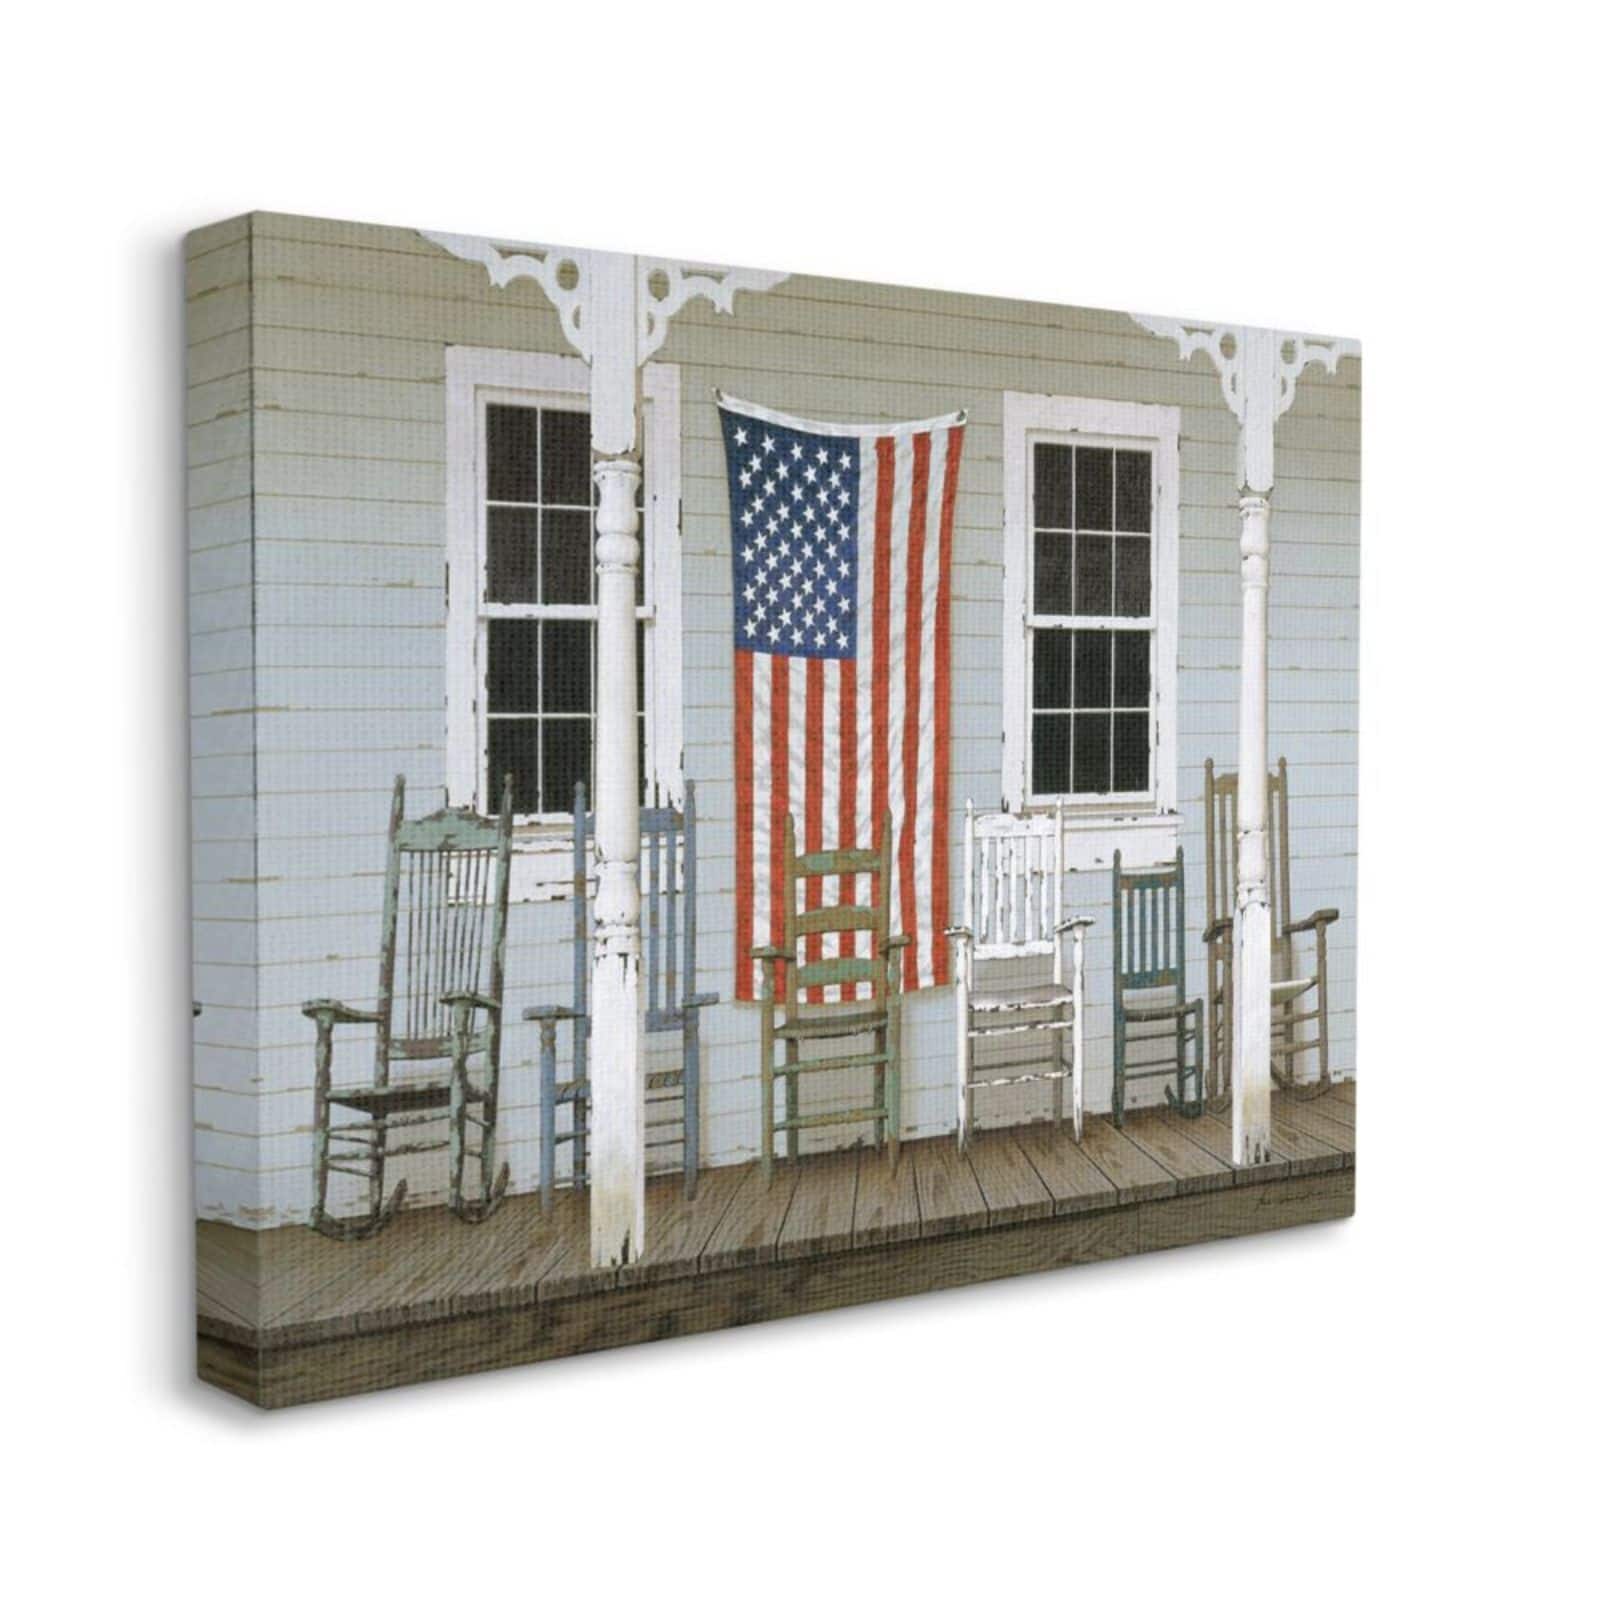 Stupell Industries Distressed Rocking Chair Porch Americana Canvas Wall Art